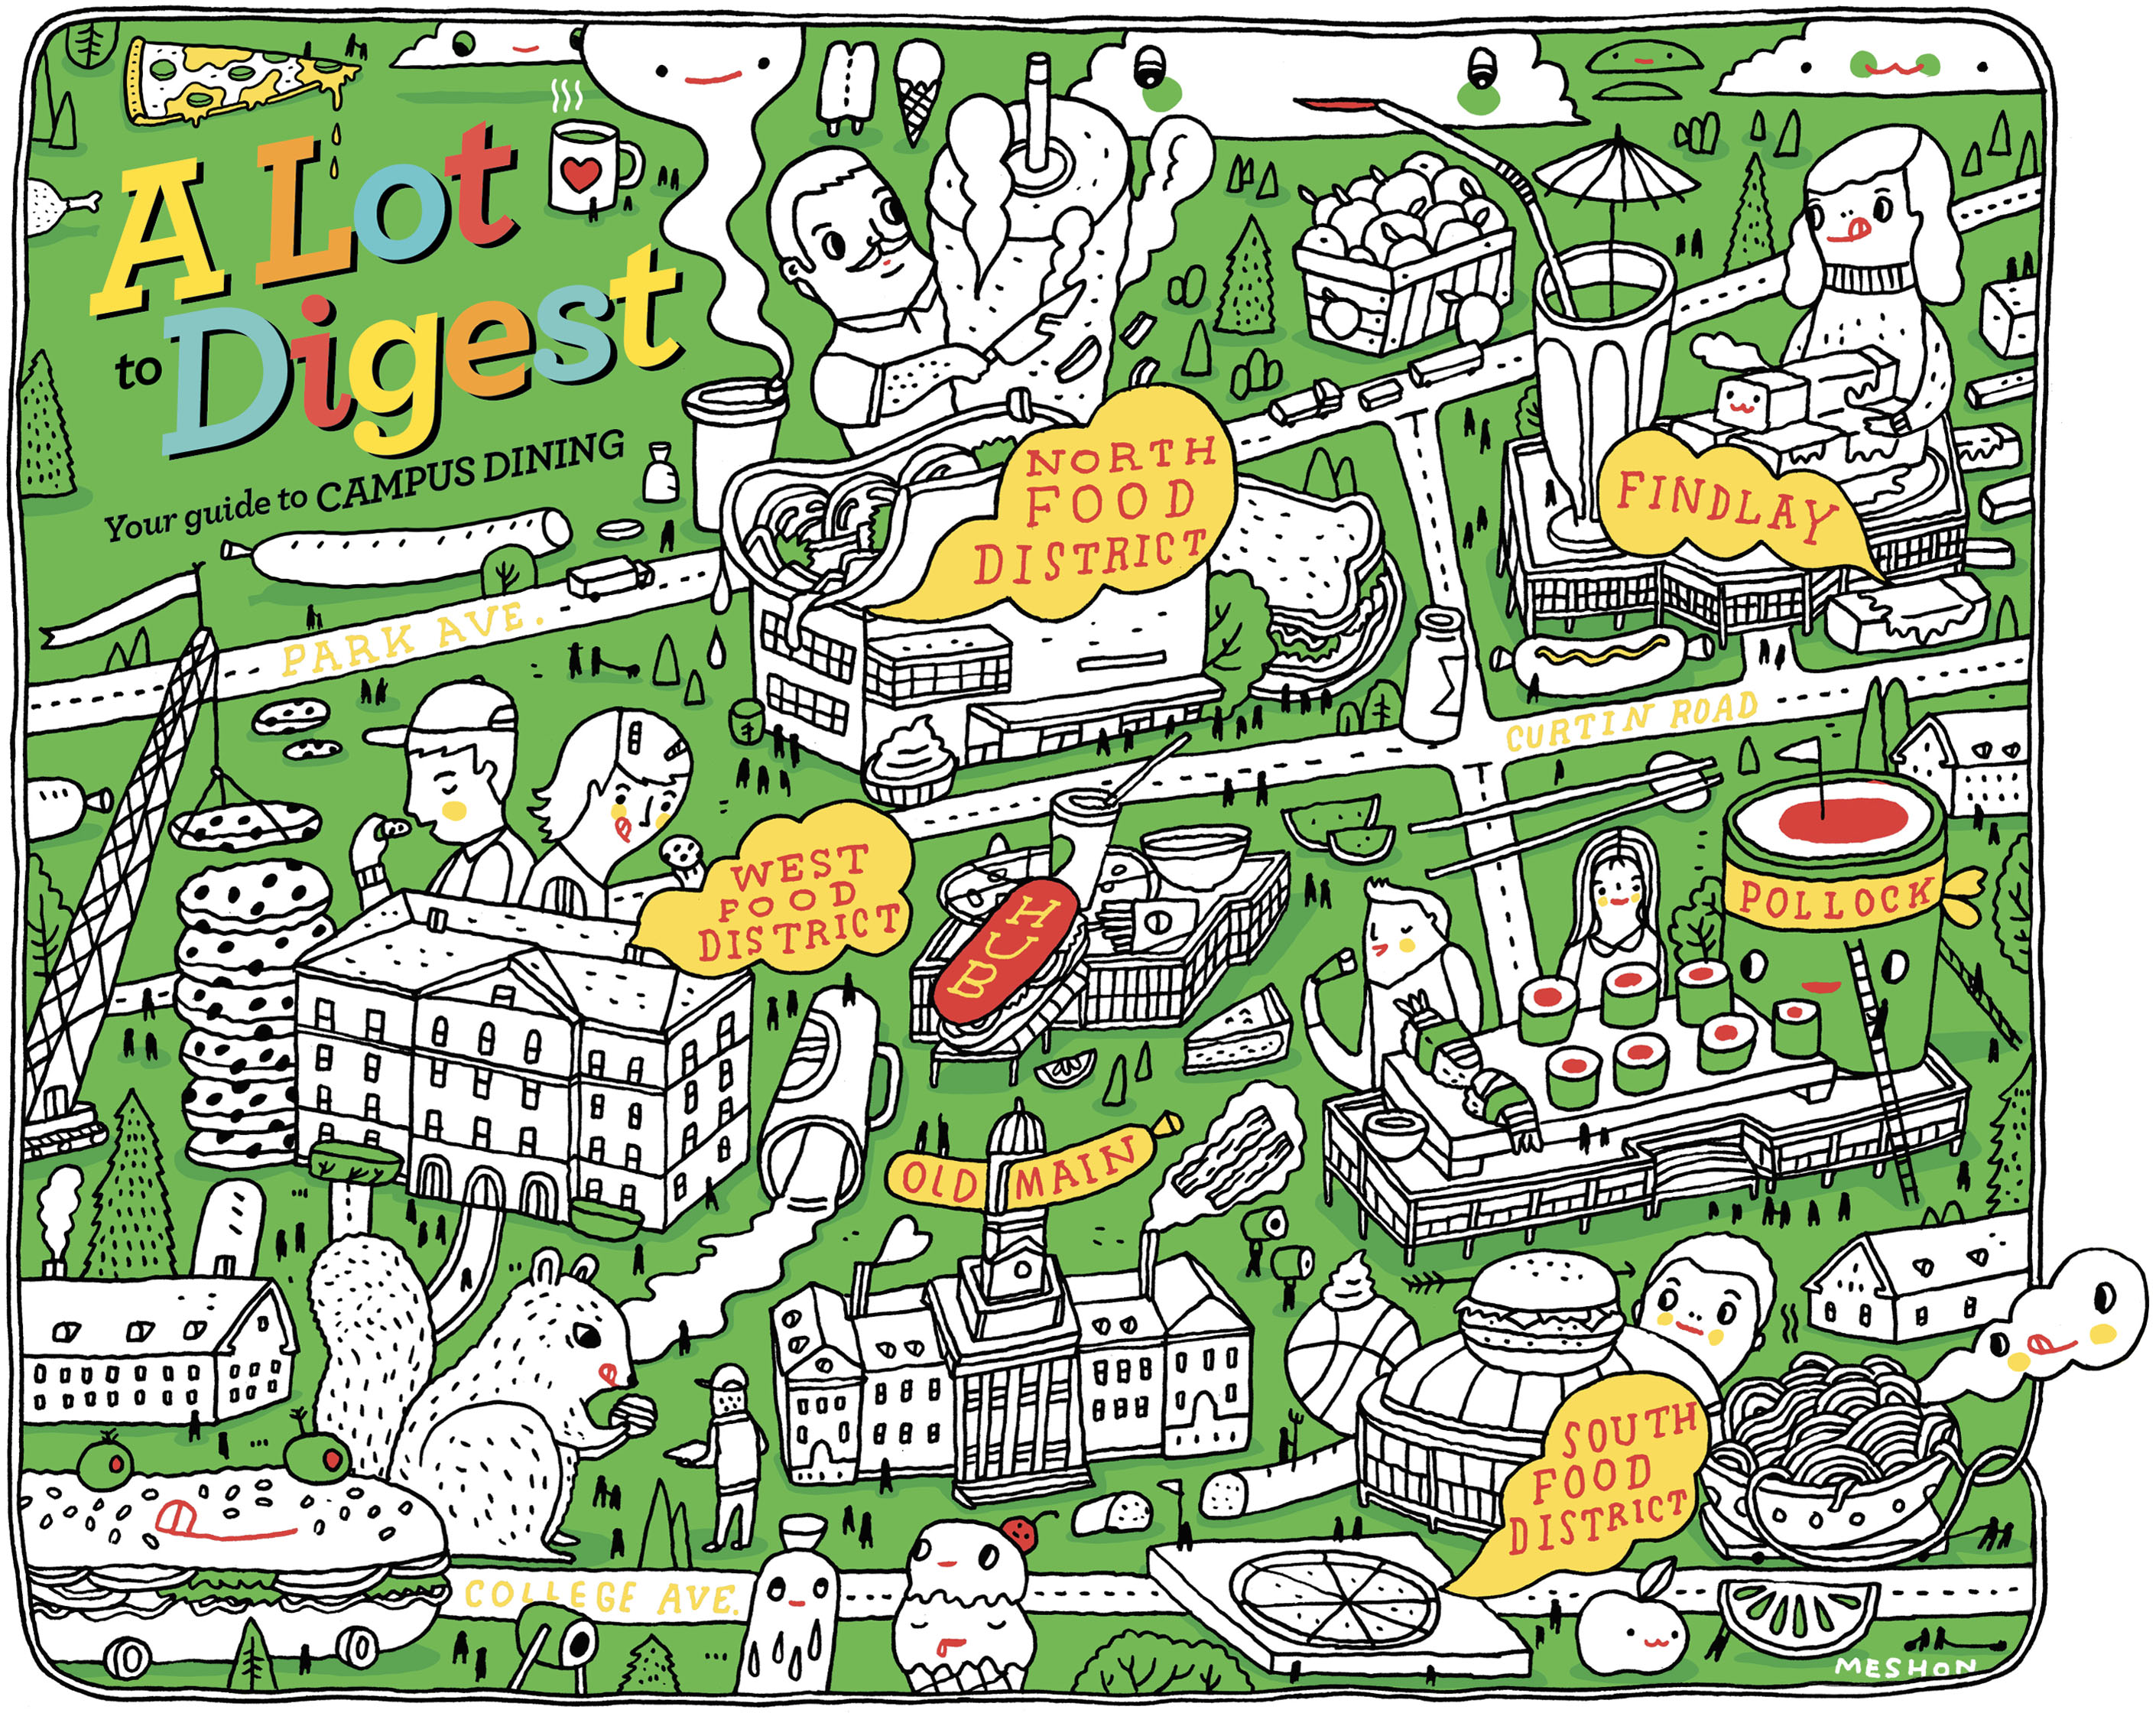 illustrated map of campus dining spots by Aaron Meshon